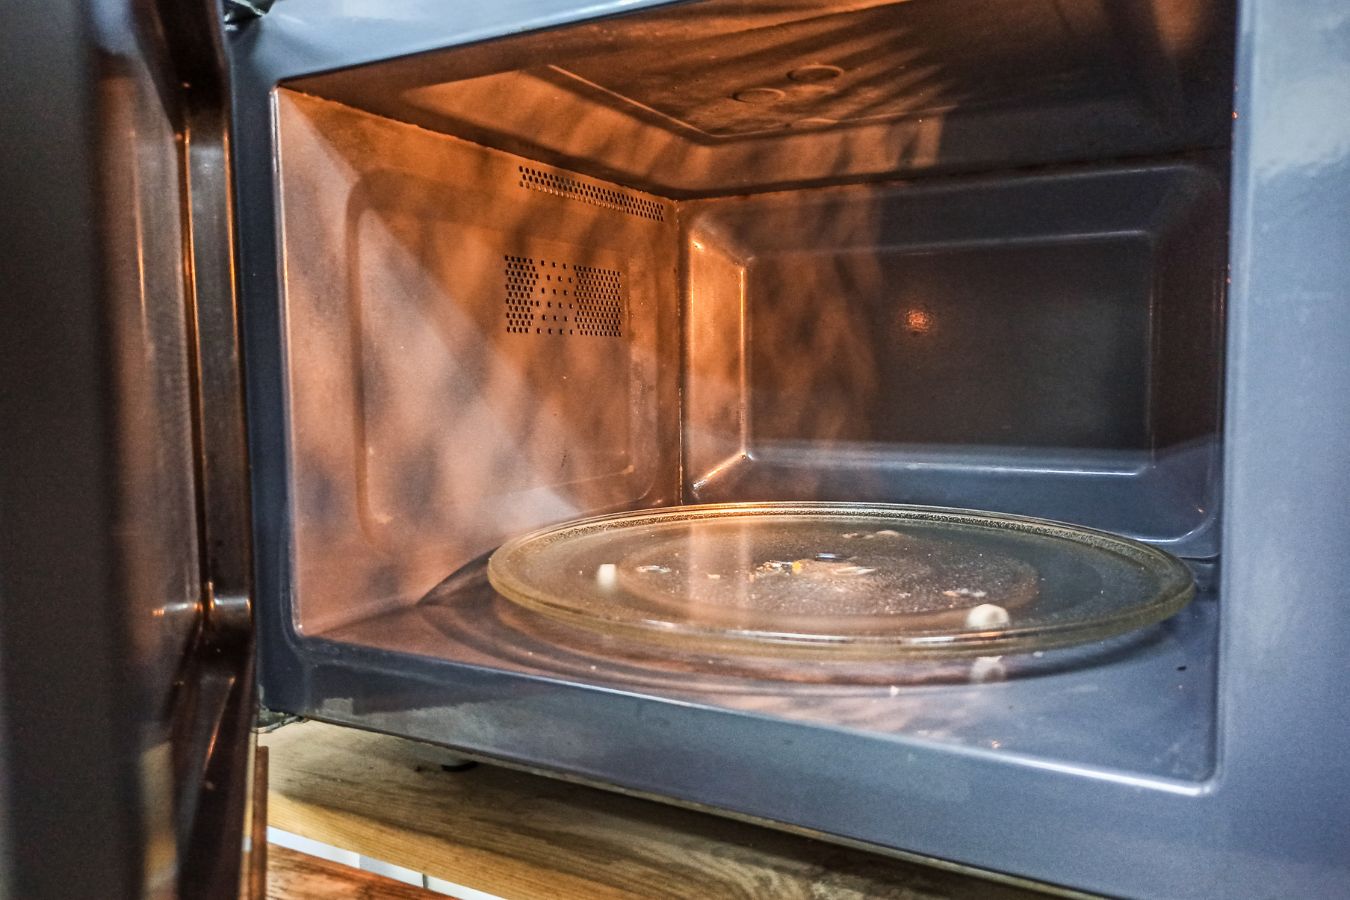 How To Roast Coffee In The Microwave (1)